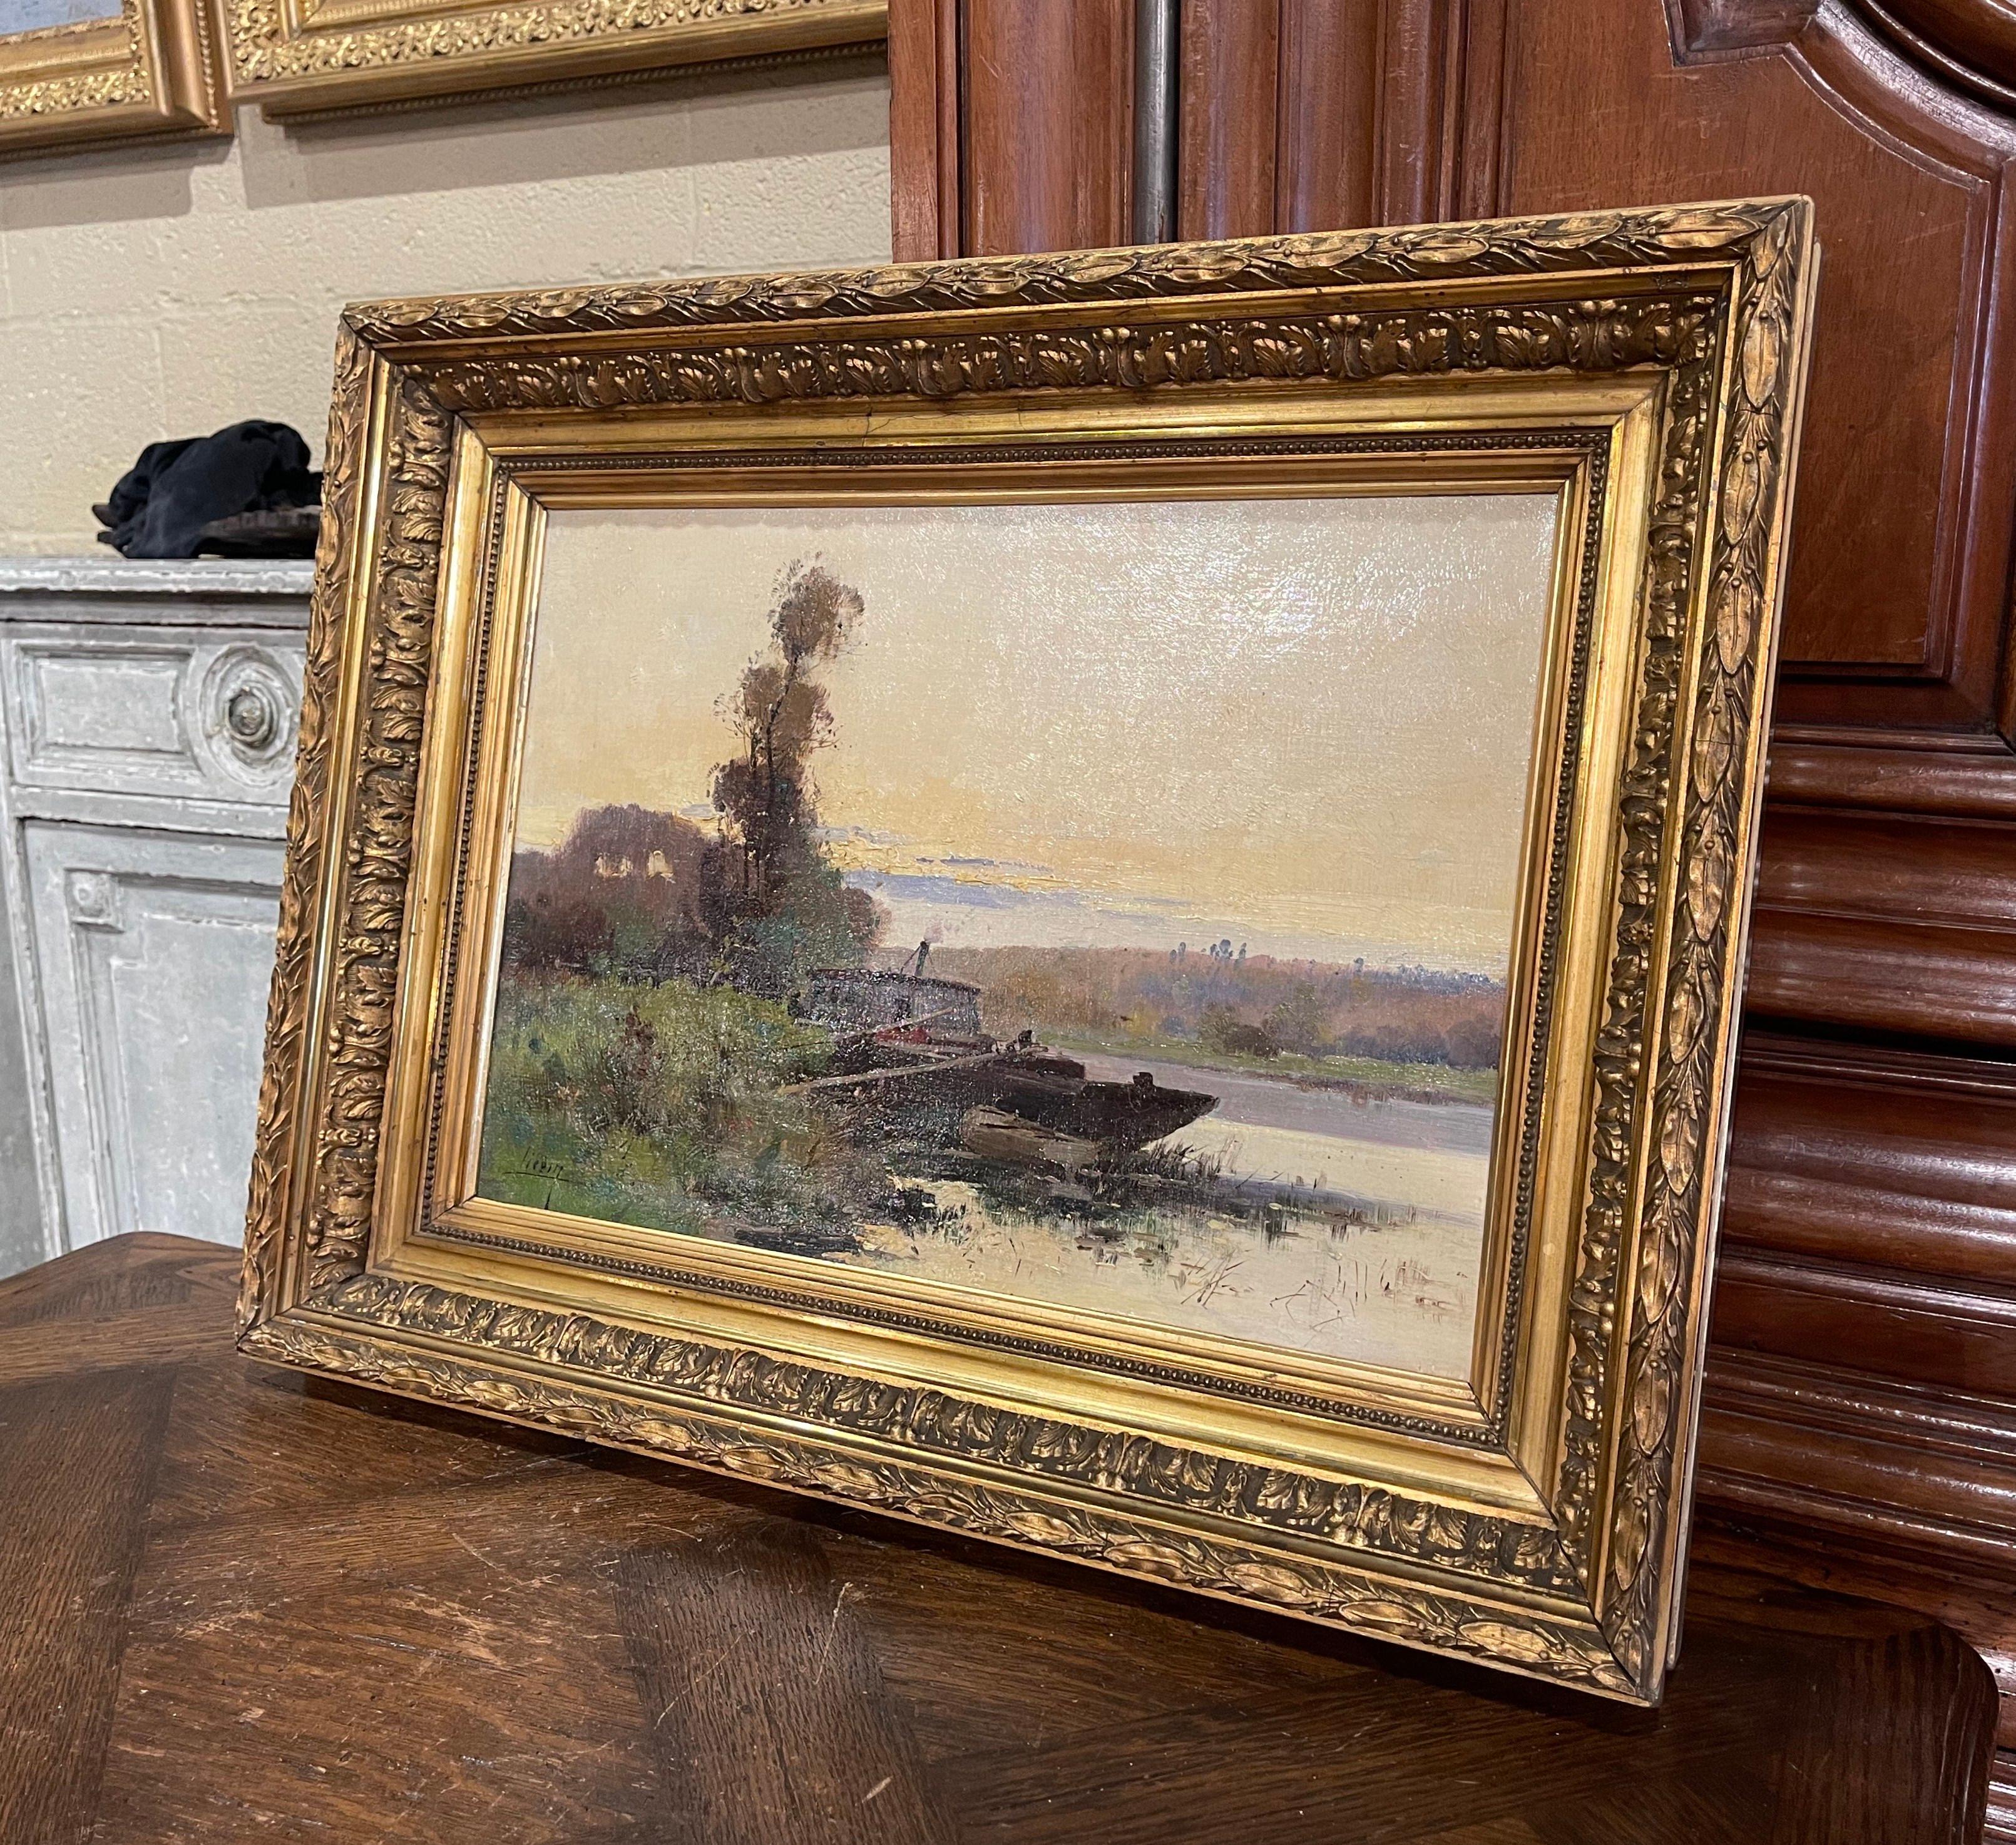 Decorate a study, living room or den with this beautiful and colorful antique oil painting! Painted in France circa 1890, the artwork is set in the original carved gilt wood frame; it illustrates a picturesque, country scene in rural France with a